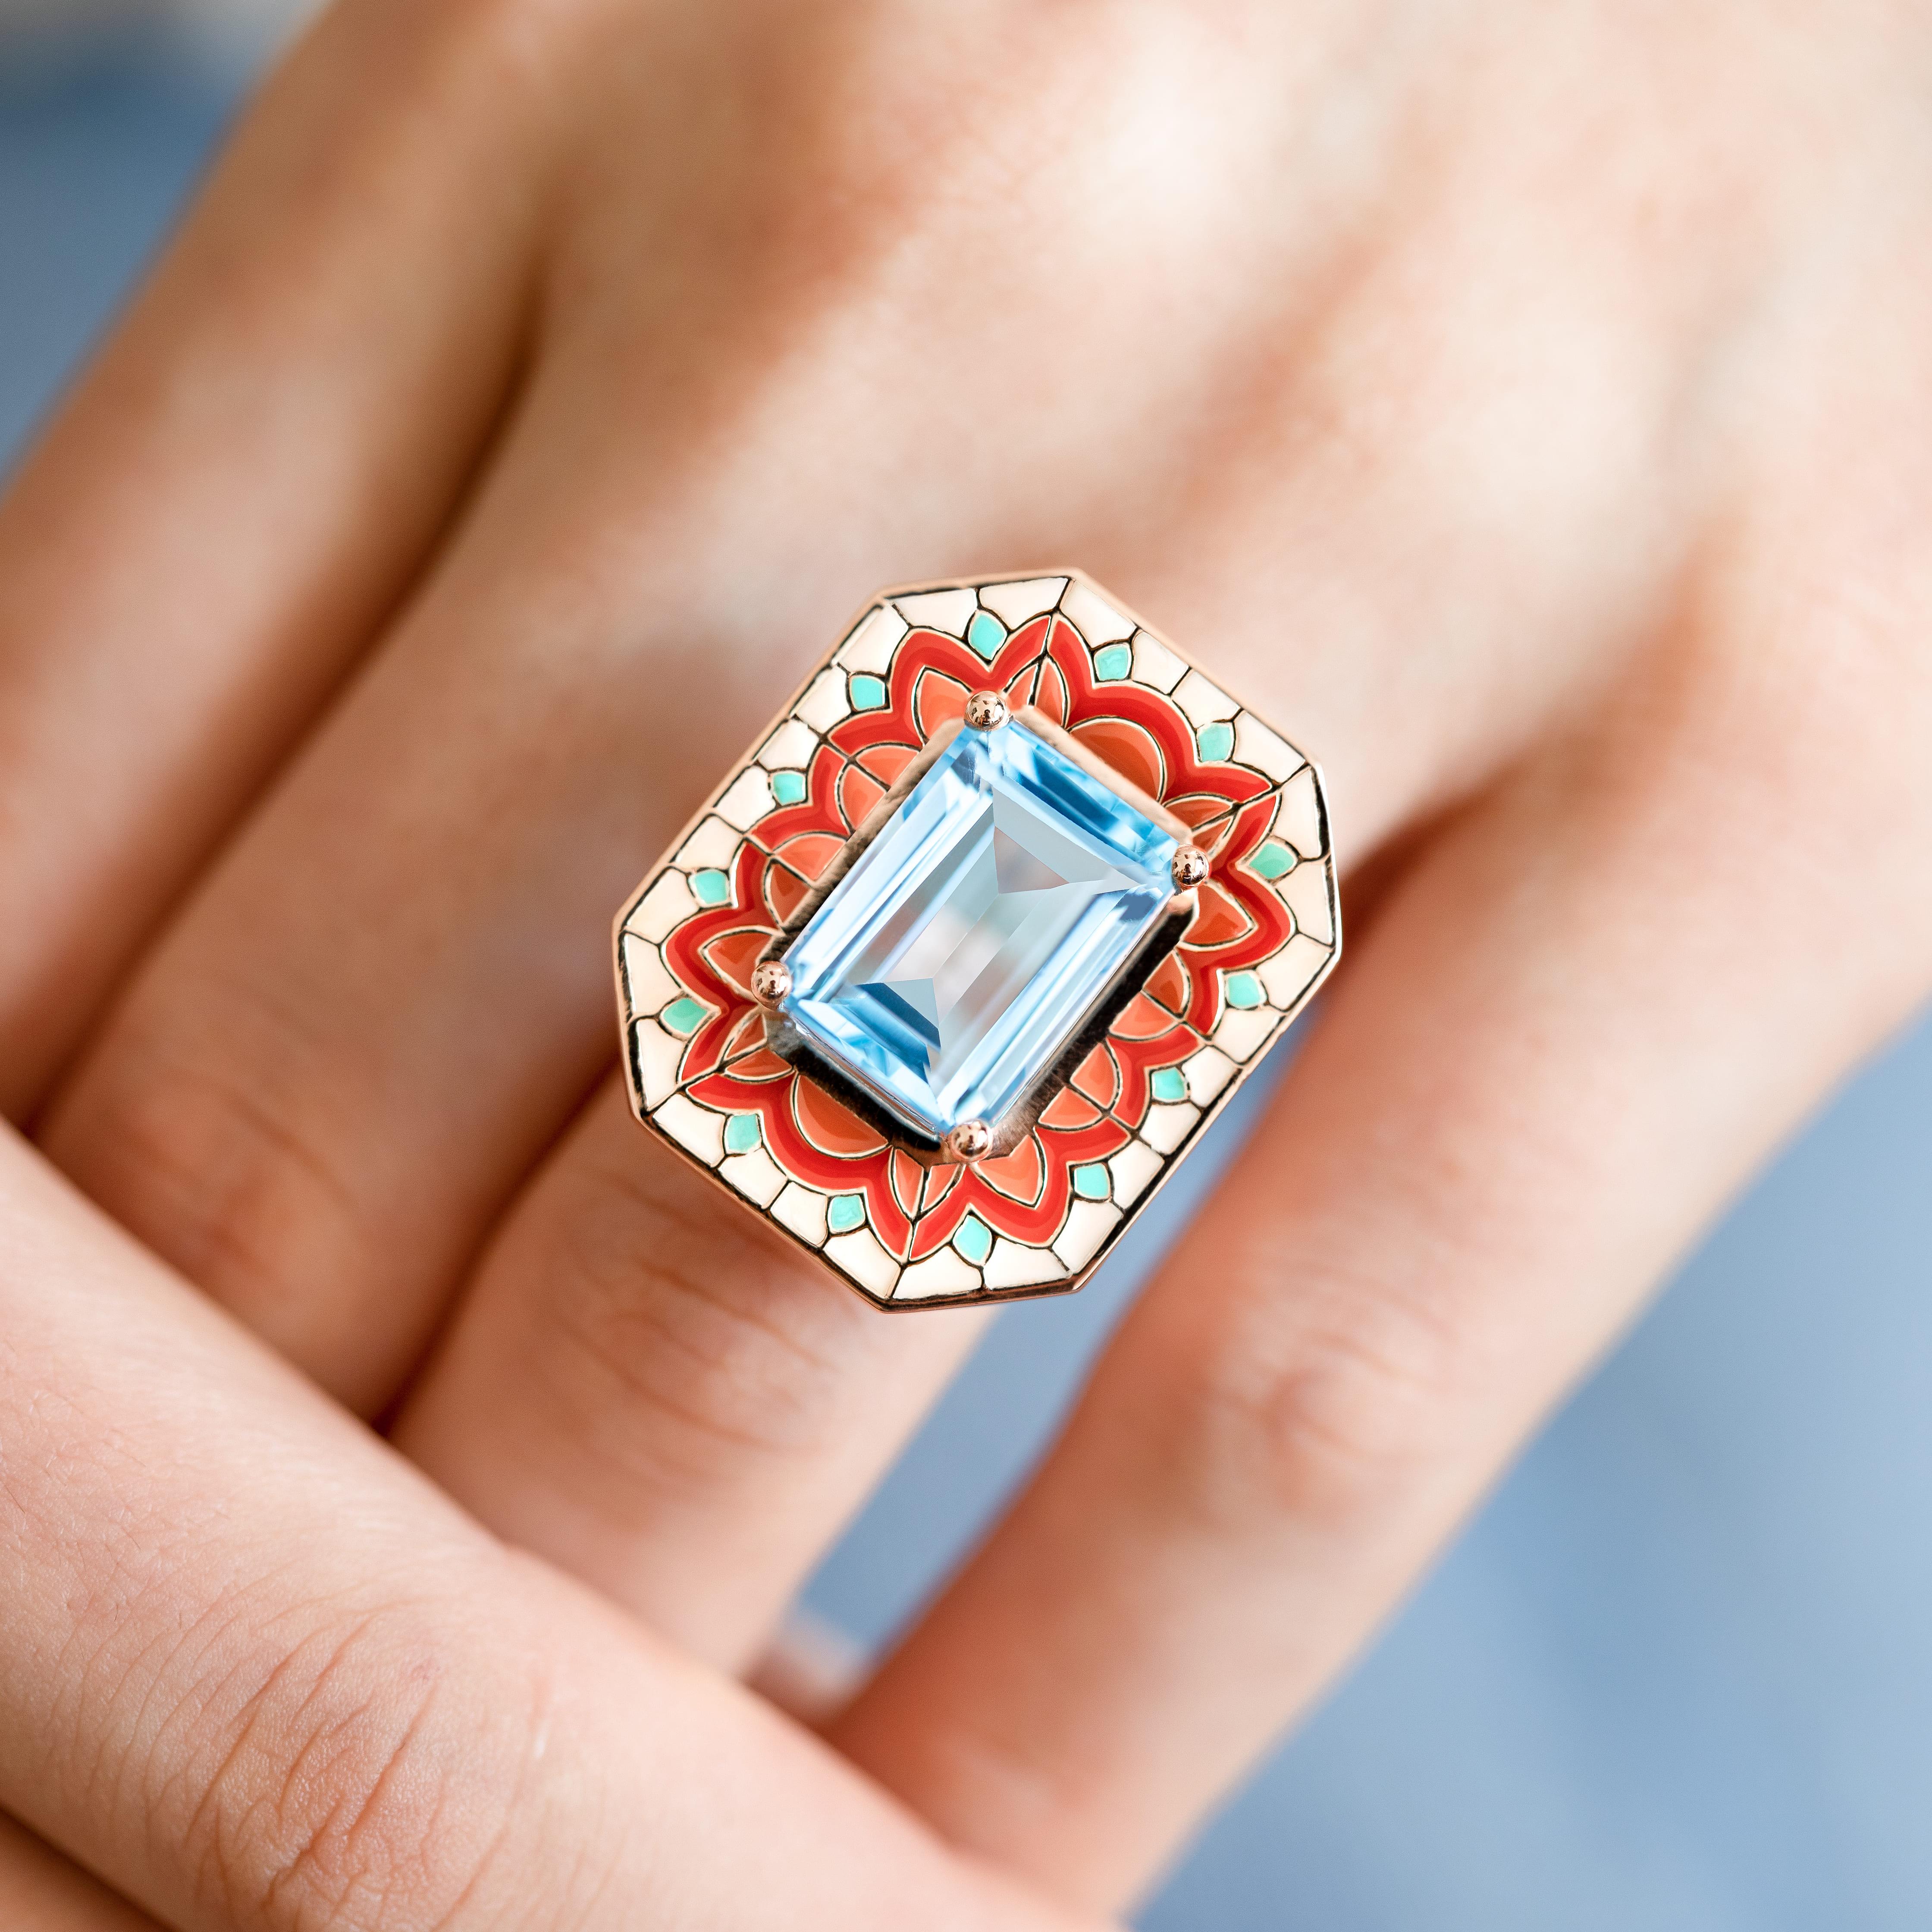 Emerald Cut Art Deco Style Ring, 6.00-7.00 Ct Sky Topaz Stone and Colorful Enamel Ring For Sale